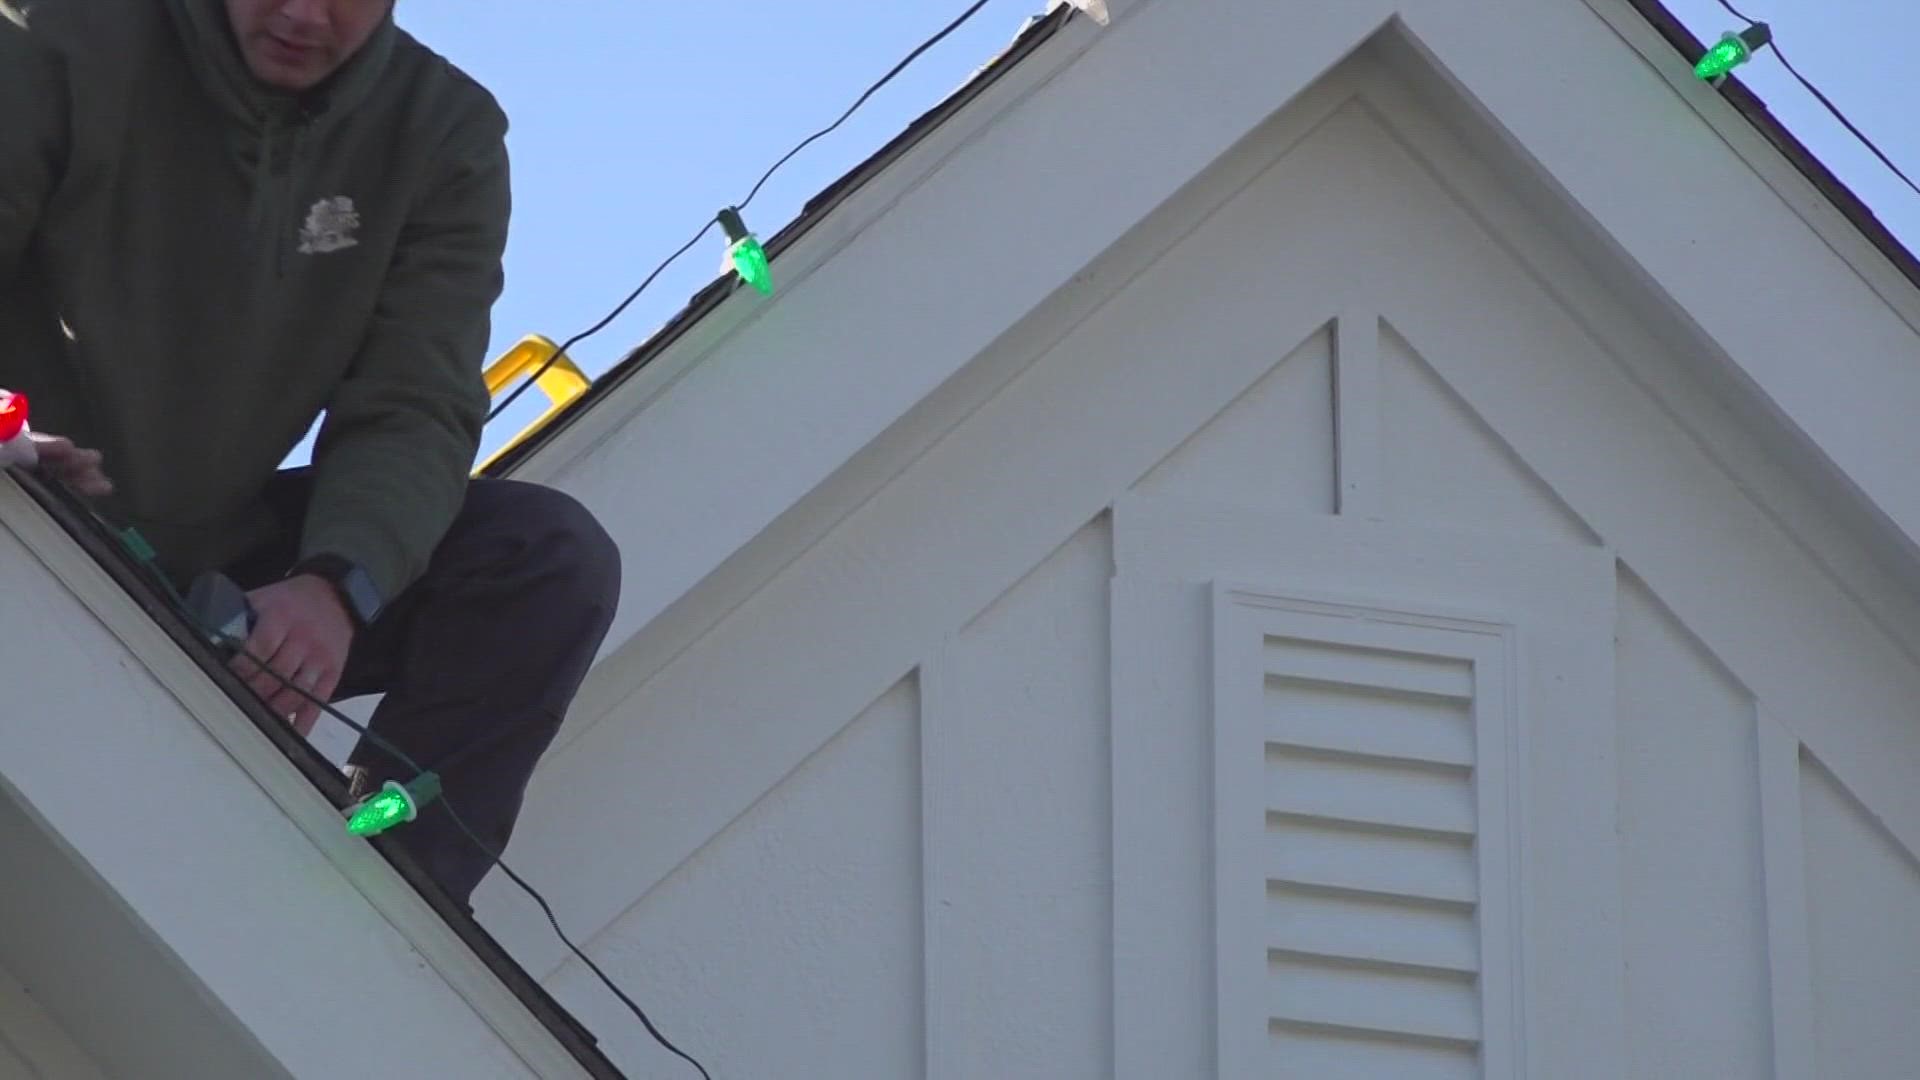 According to a survey, Dec. 1 is one of the most popular days to put up your Christmas lights.